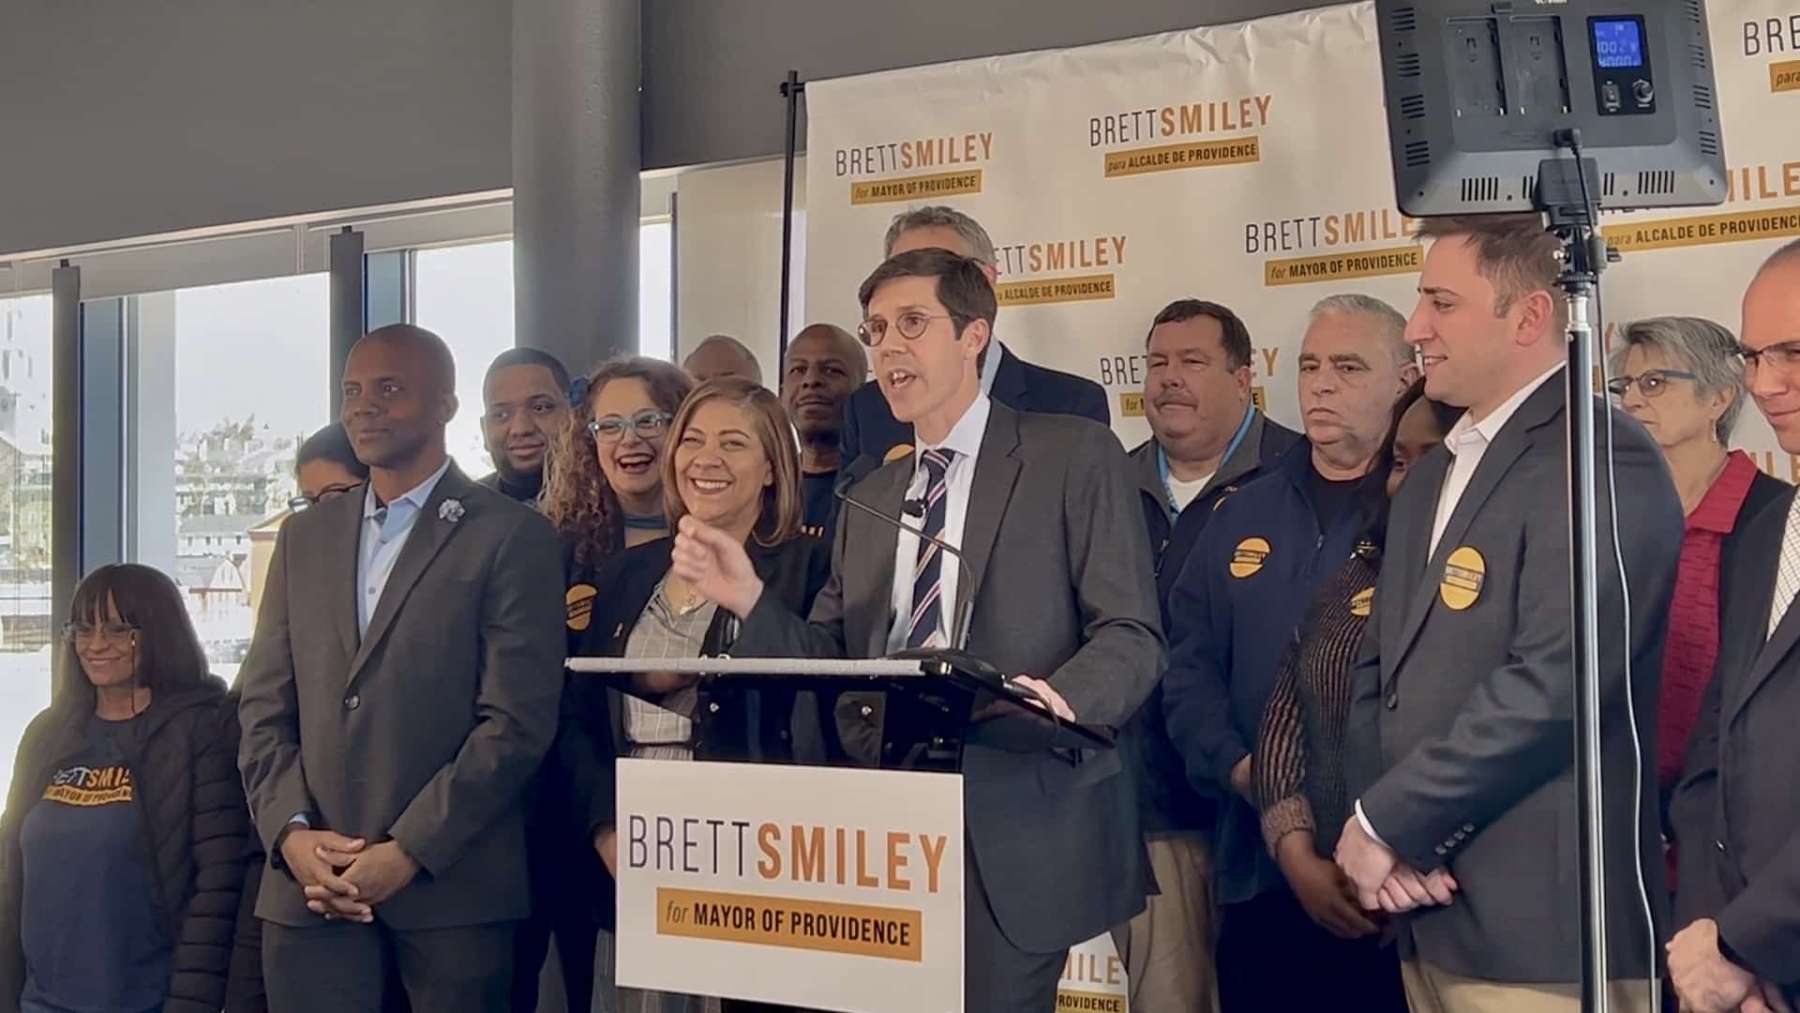 Brett Smiley officially kicks off his campaign for Mayor of Providence